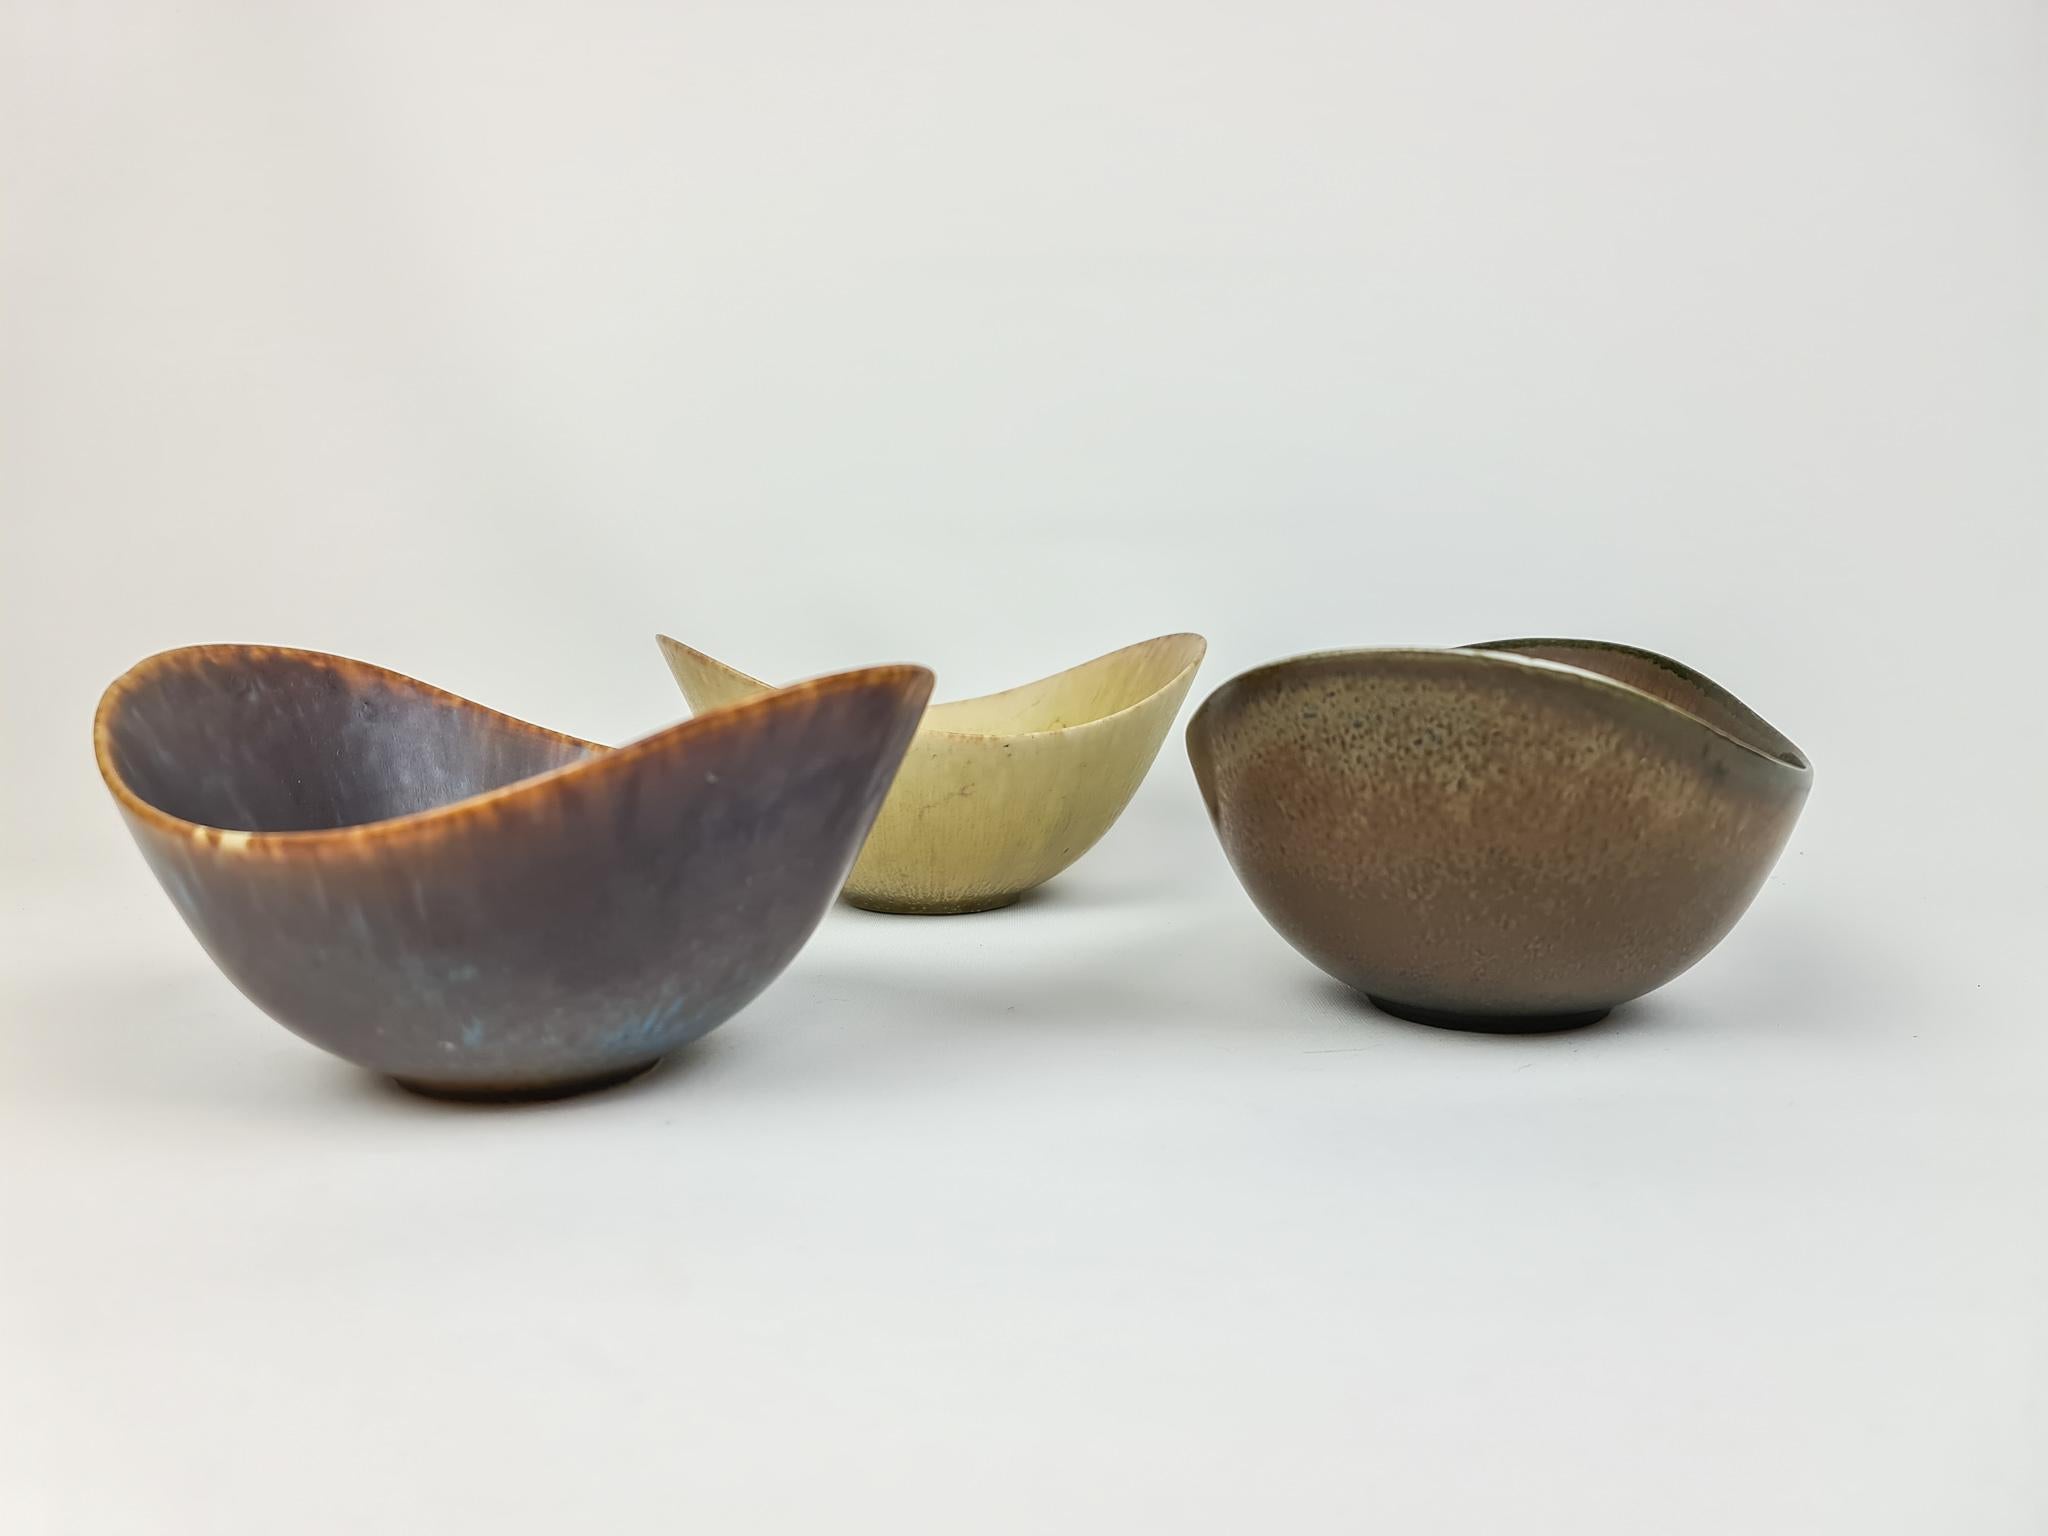 This wonderful collection of 3 ARO bowls was created and designed by Gunnar Nylund at the Rörstrand Factory in the 1950s, Sweden.

The glaze is amazing and works with the articulate form of the bowls.

Very nice condition.

Measures: W 16, D